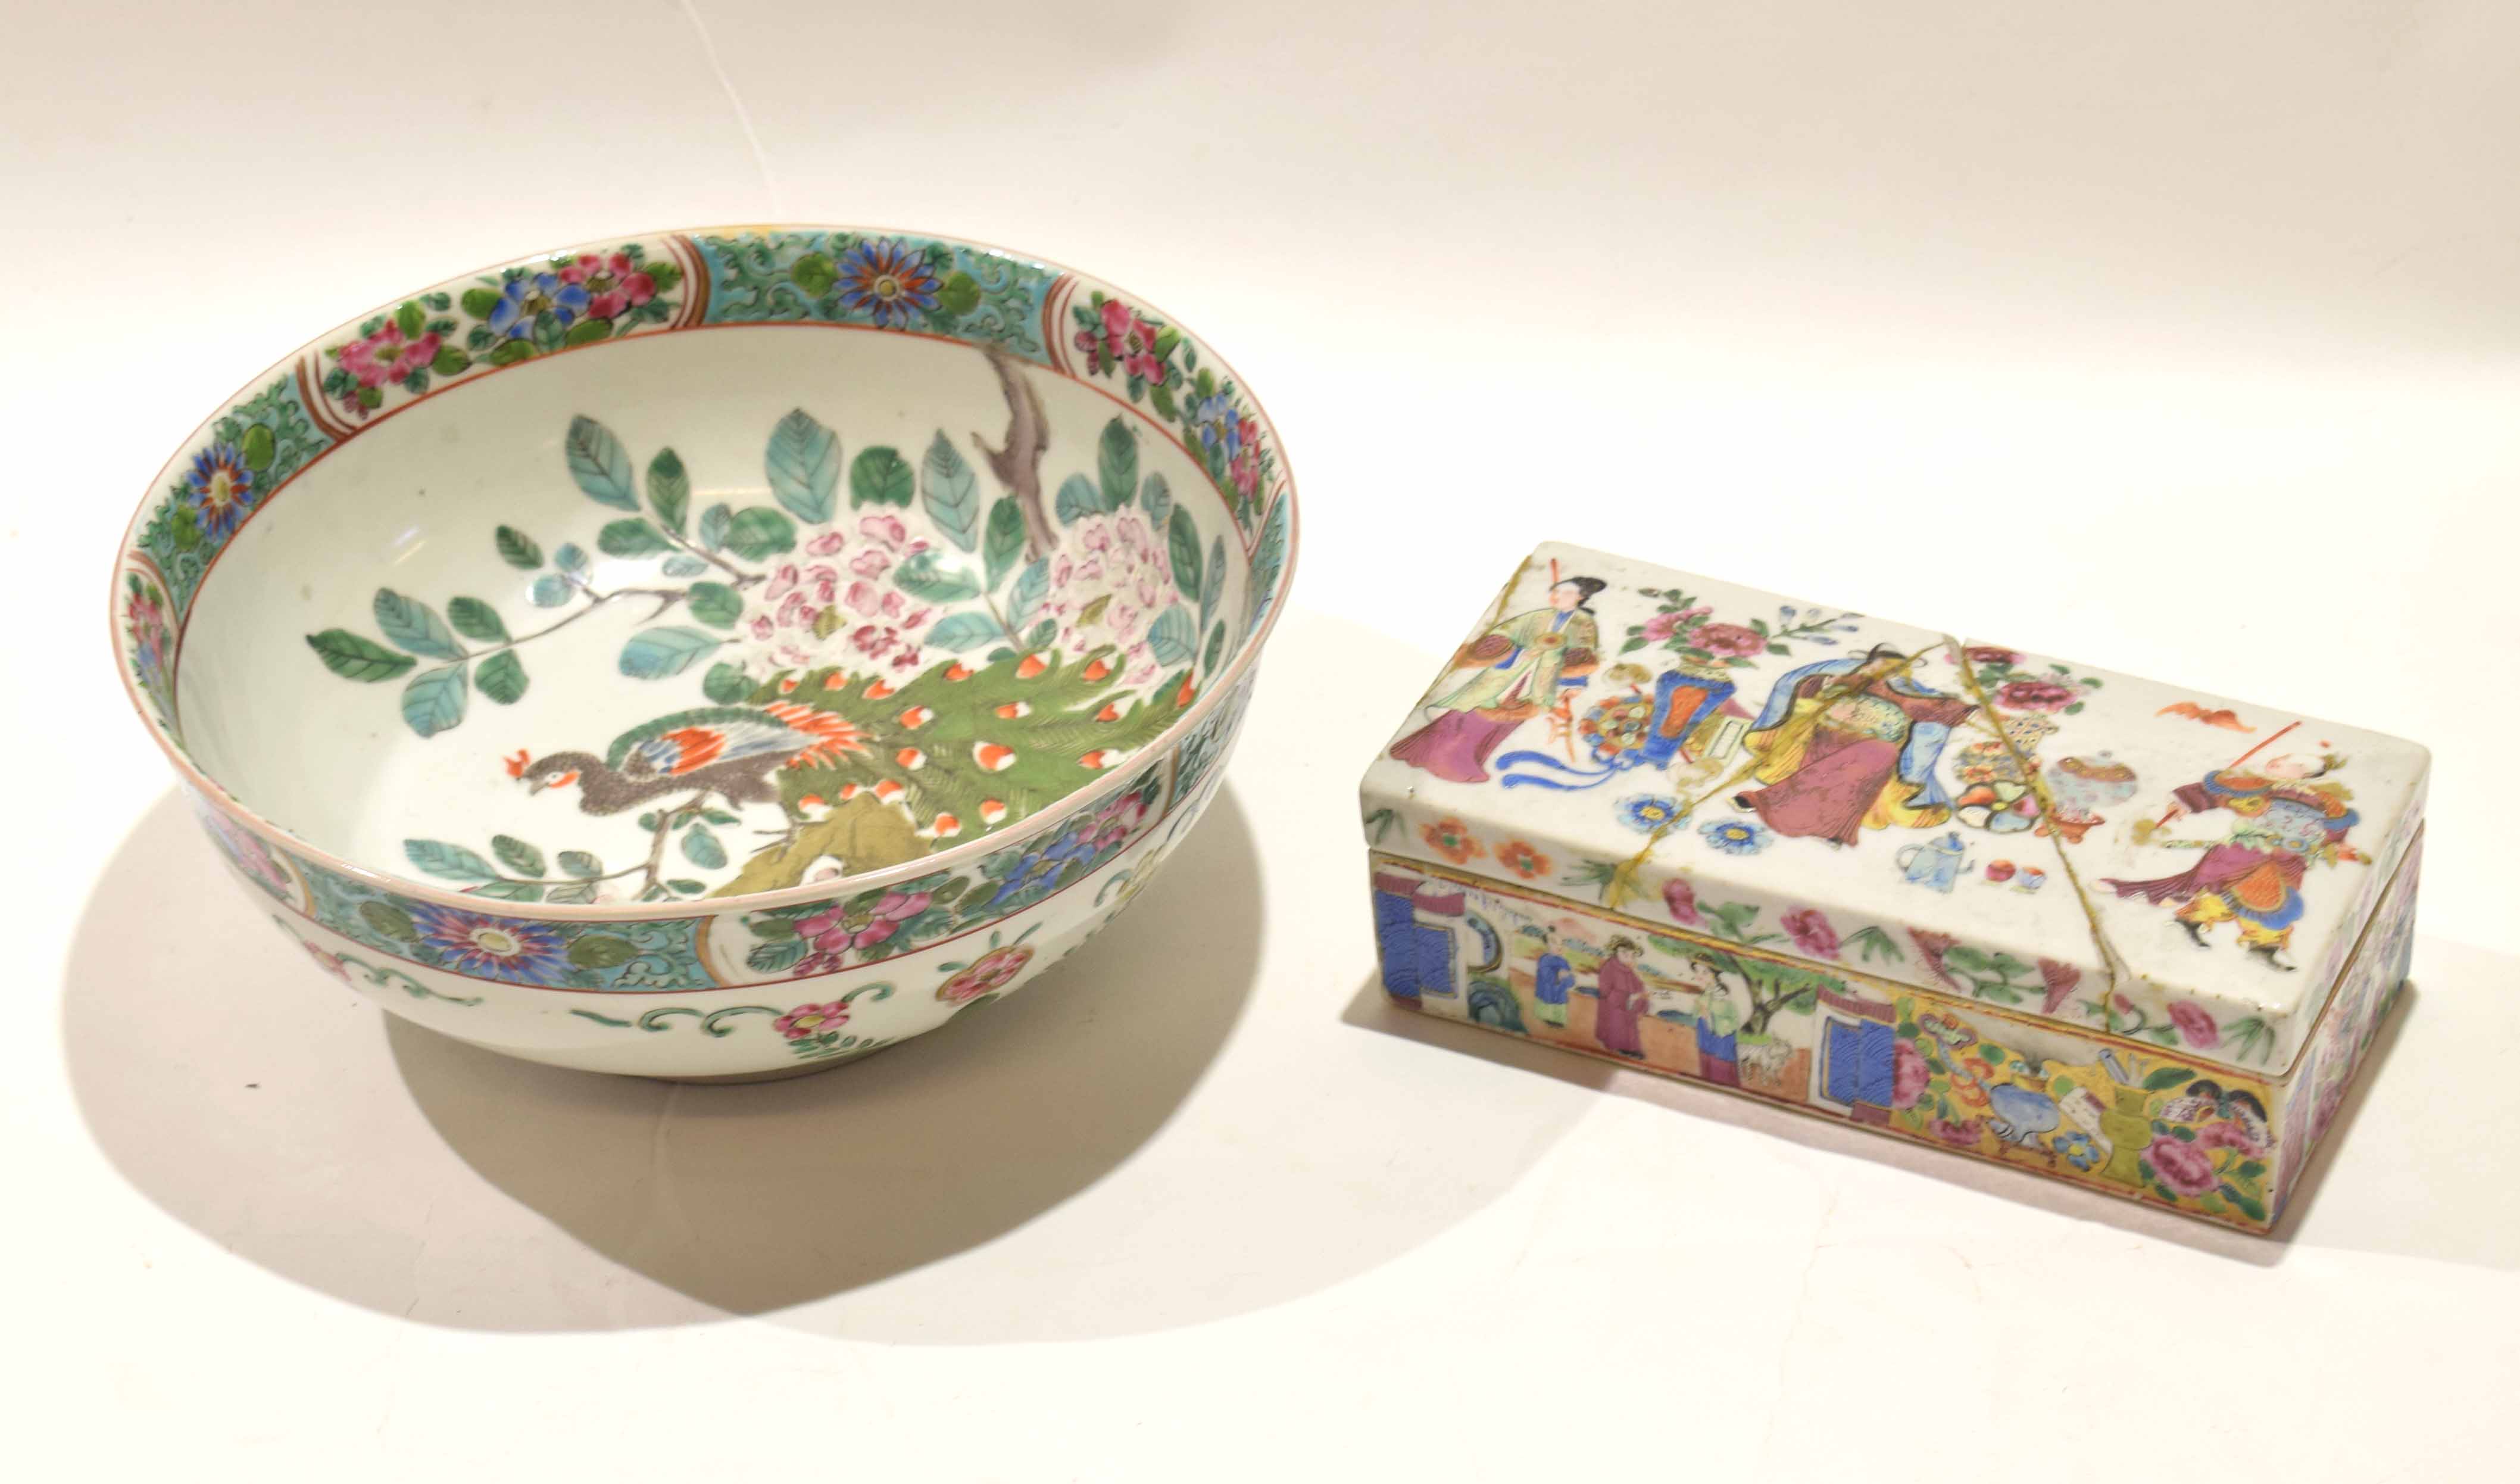 Late 19th century Cantonese porcelain rectangular box and cover decorated in famille rose with